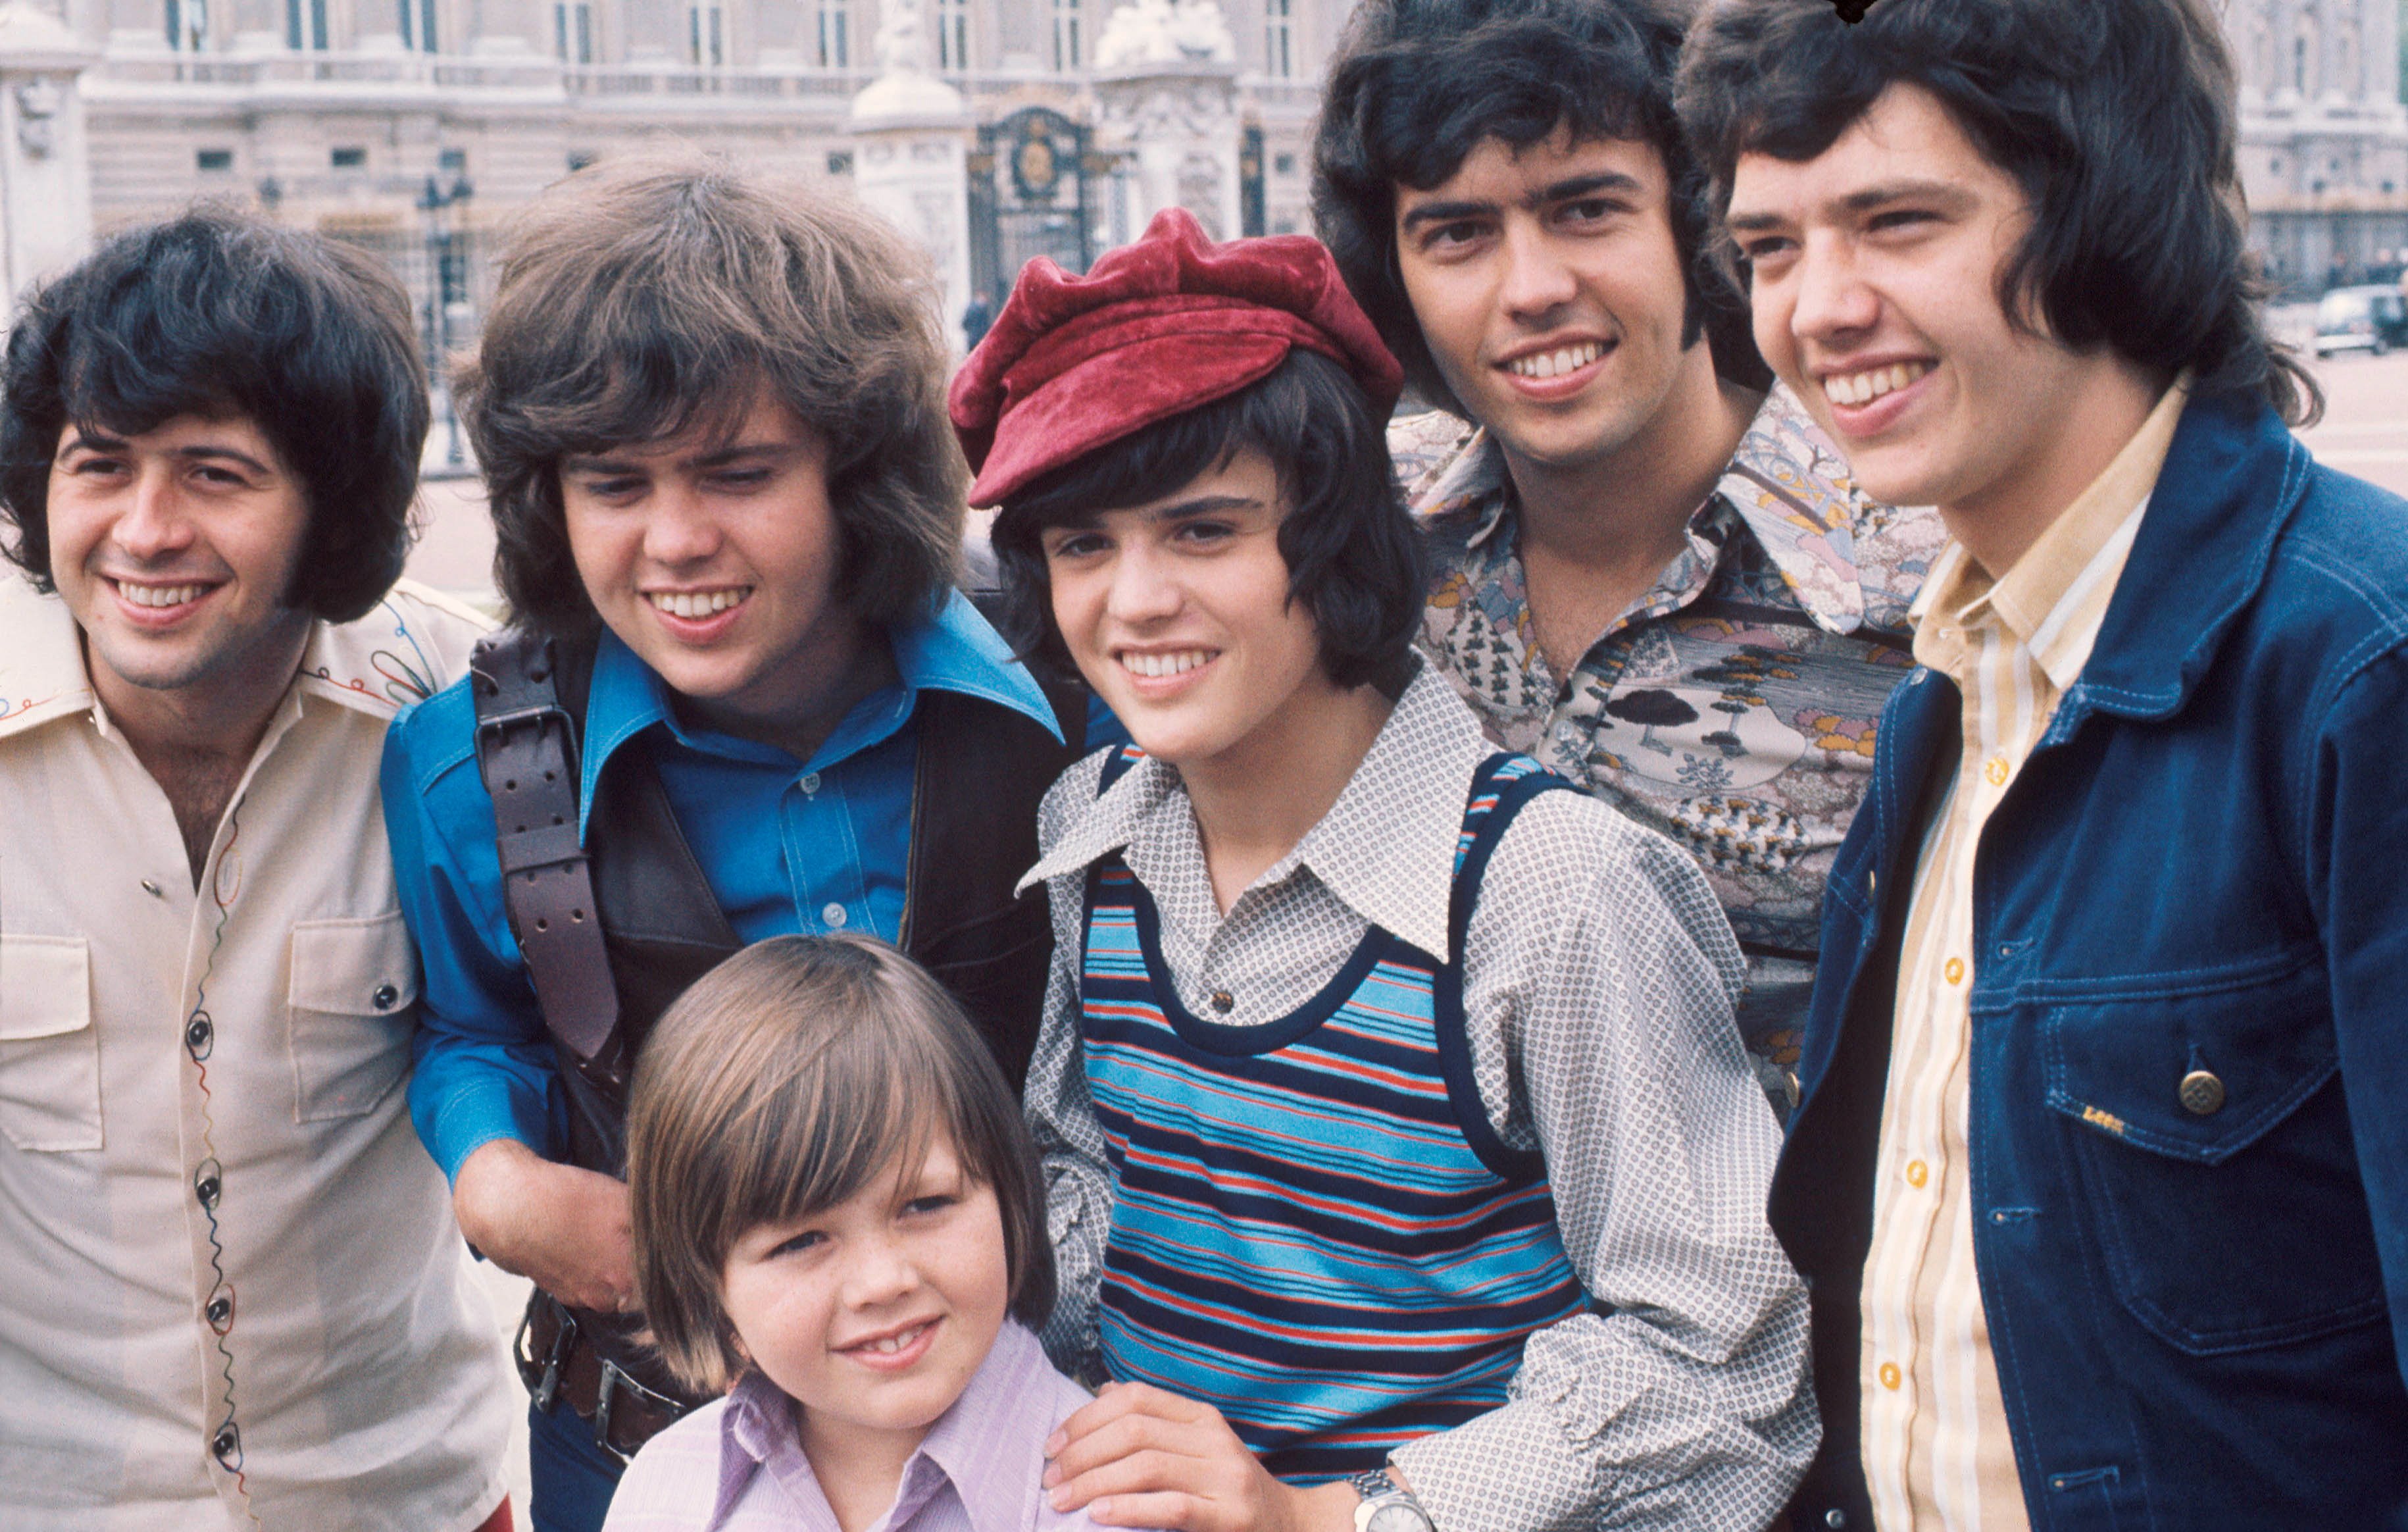 A portrait of The Osmonds in London in 1973. | Photo: Getty Images